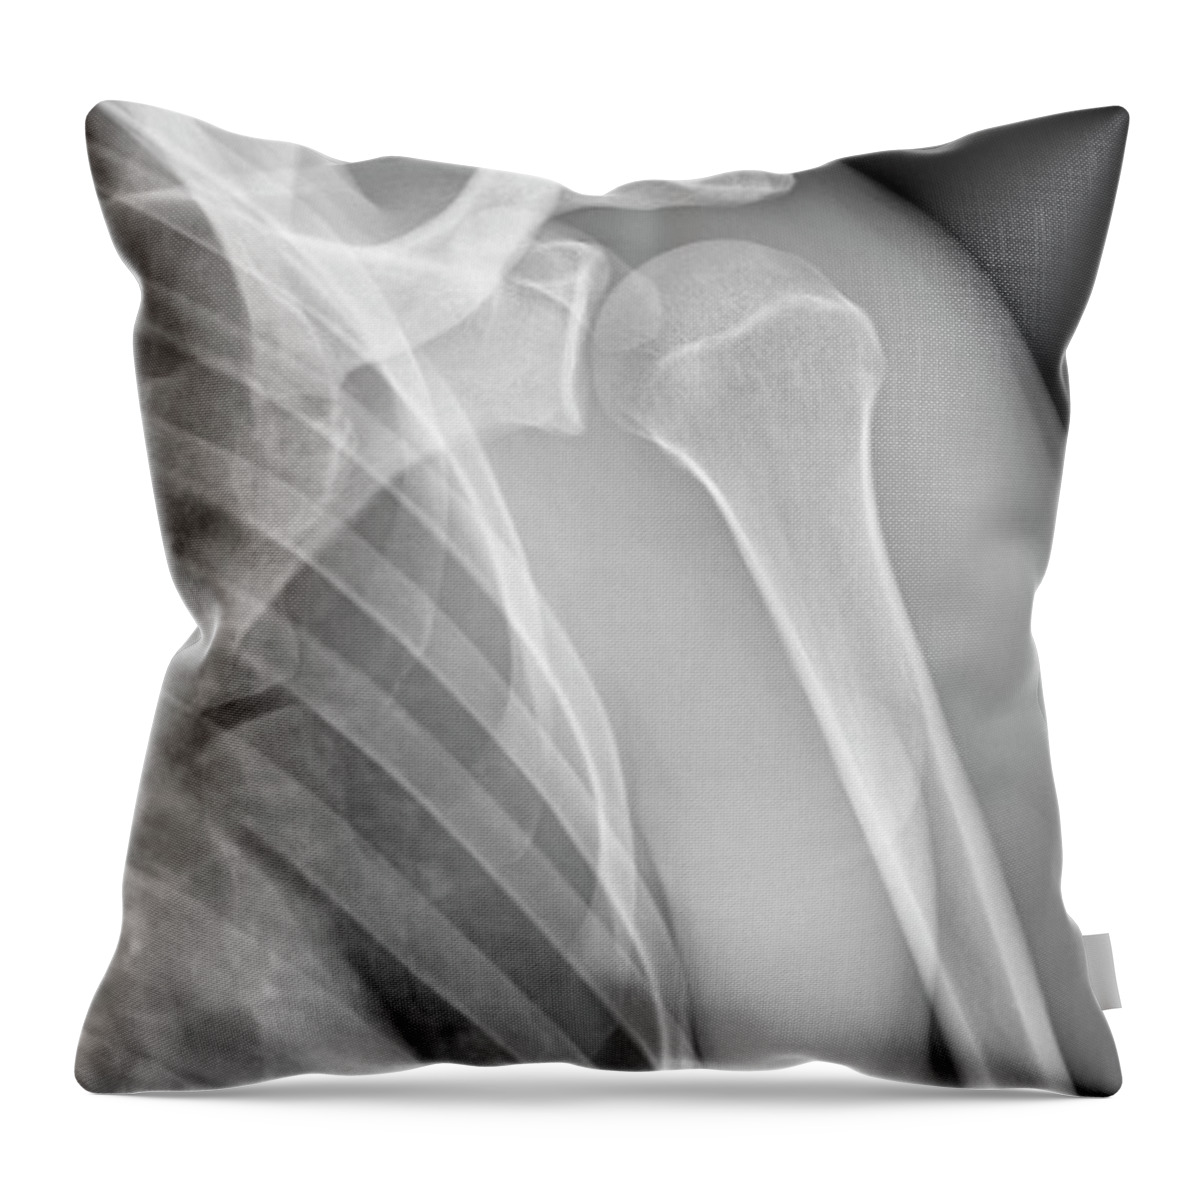 Hip Replacement #3 Throw Pillow by Medical Body Scans - Fine Art America